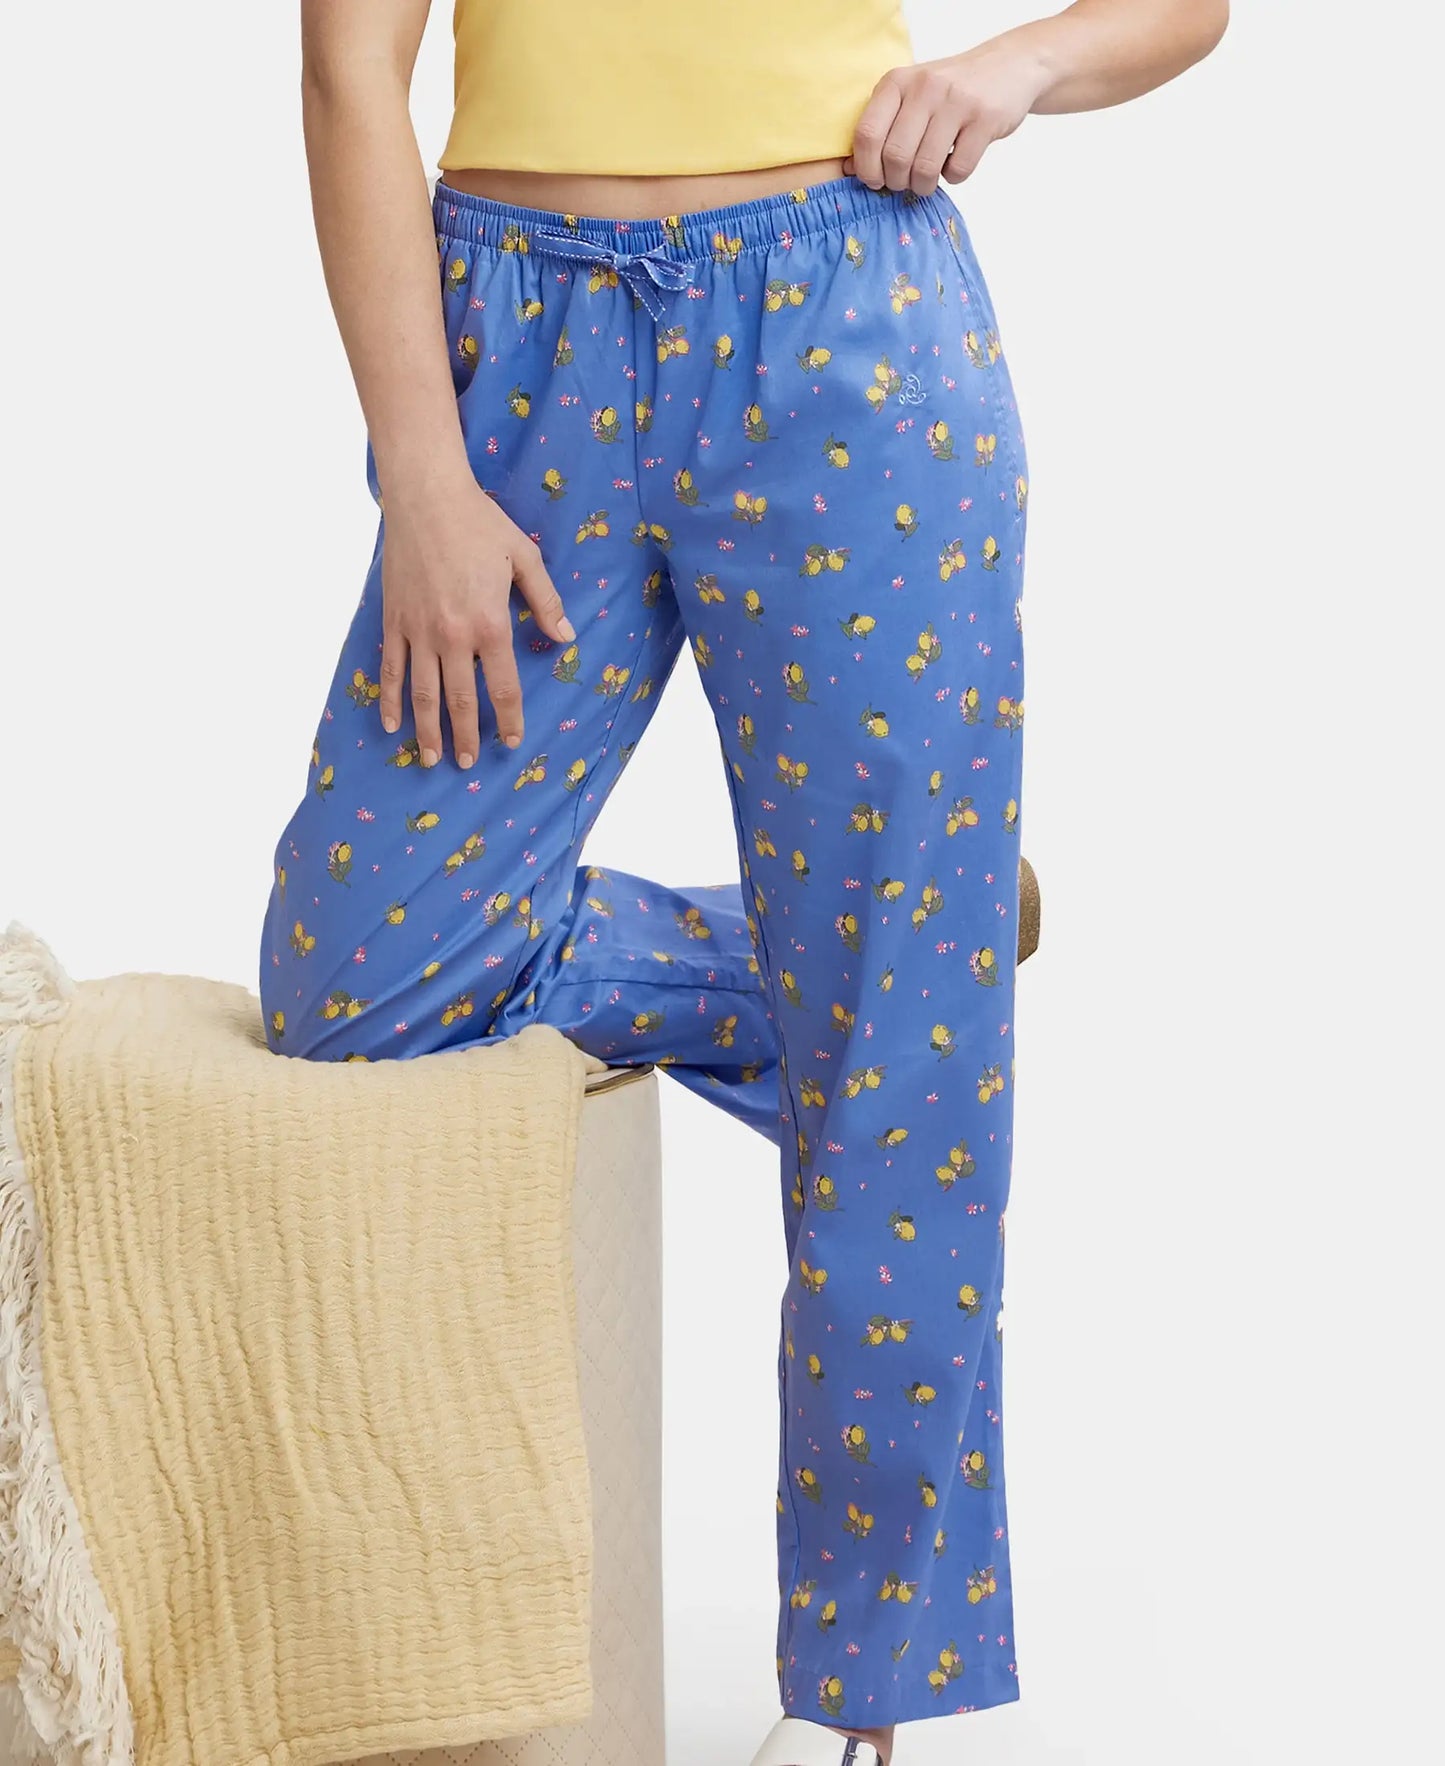 Super Combed Cotton Woven Fabric Relaxed Fit Striped Pyjama with Side Pockets - Iris Blue Assorted Checks-5